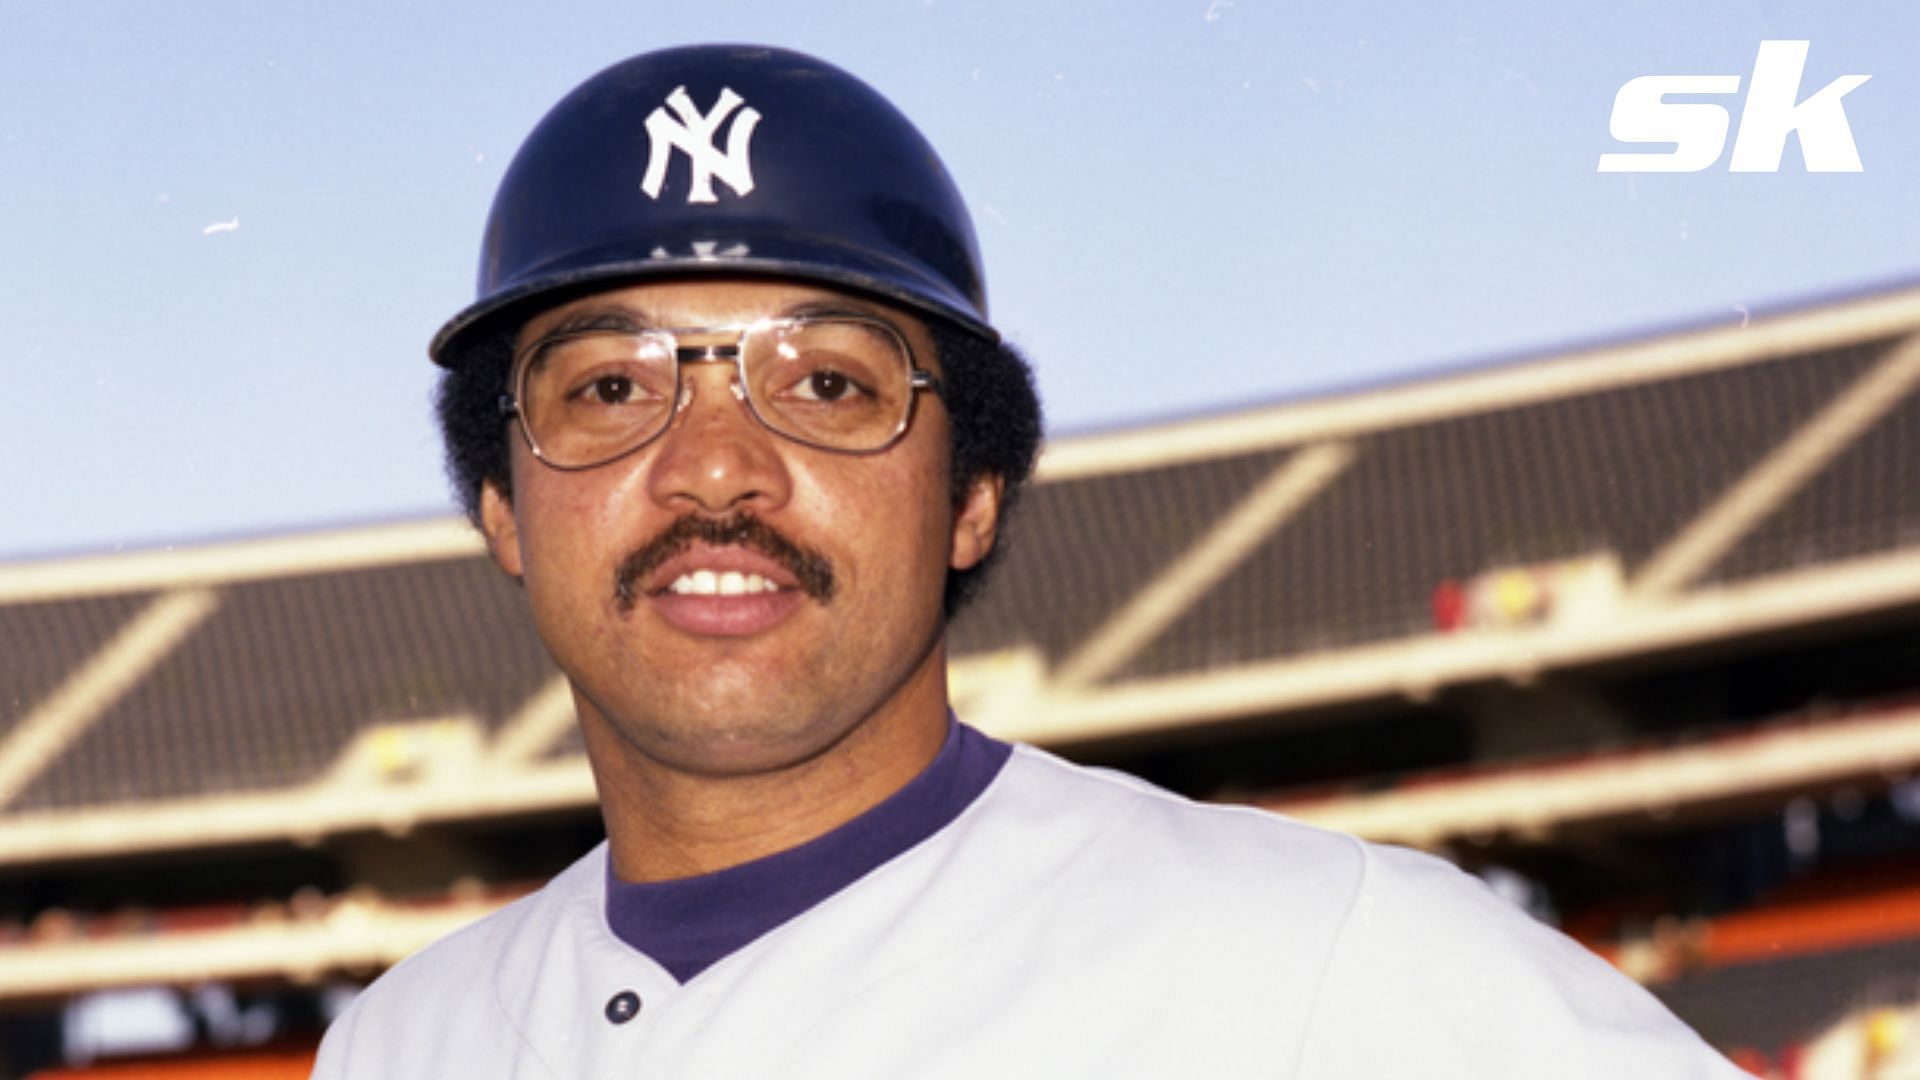 Yankees legend Reggie Jackson: Protests feel 'different this time